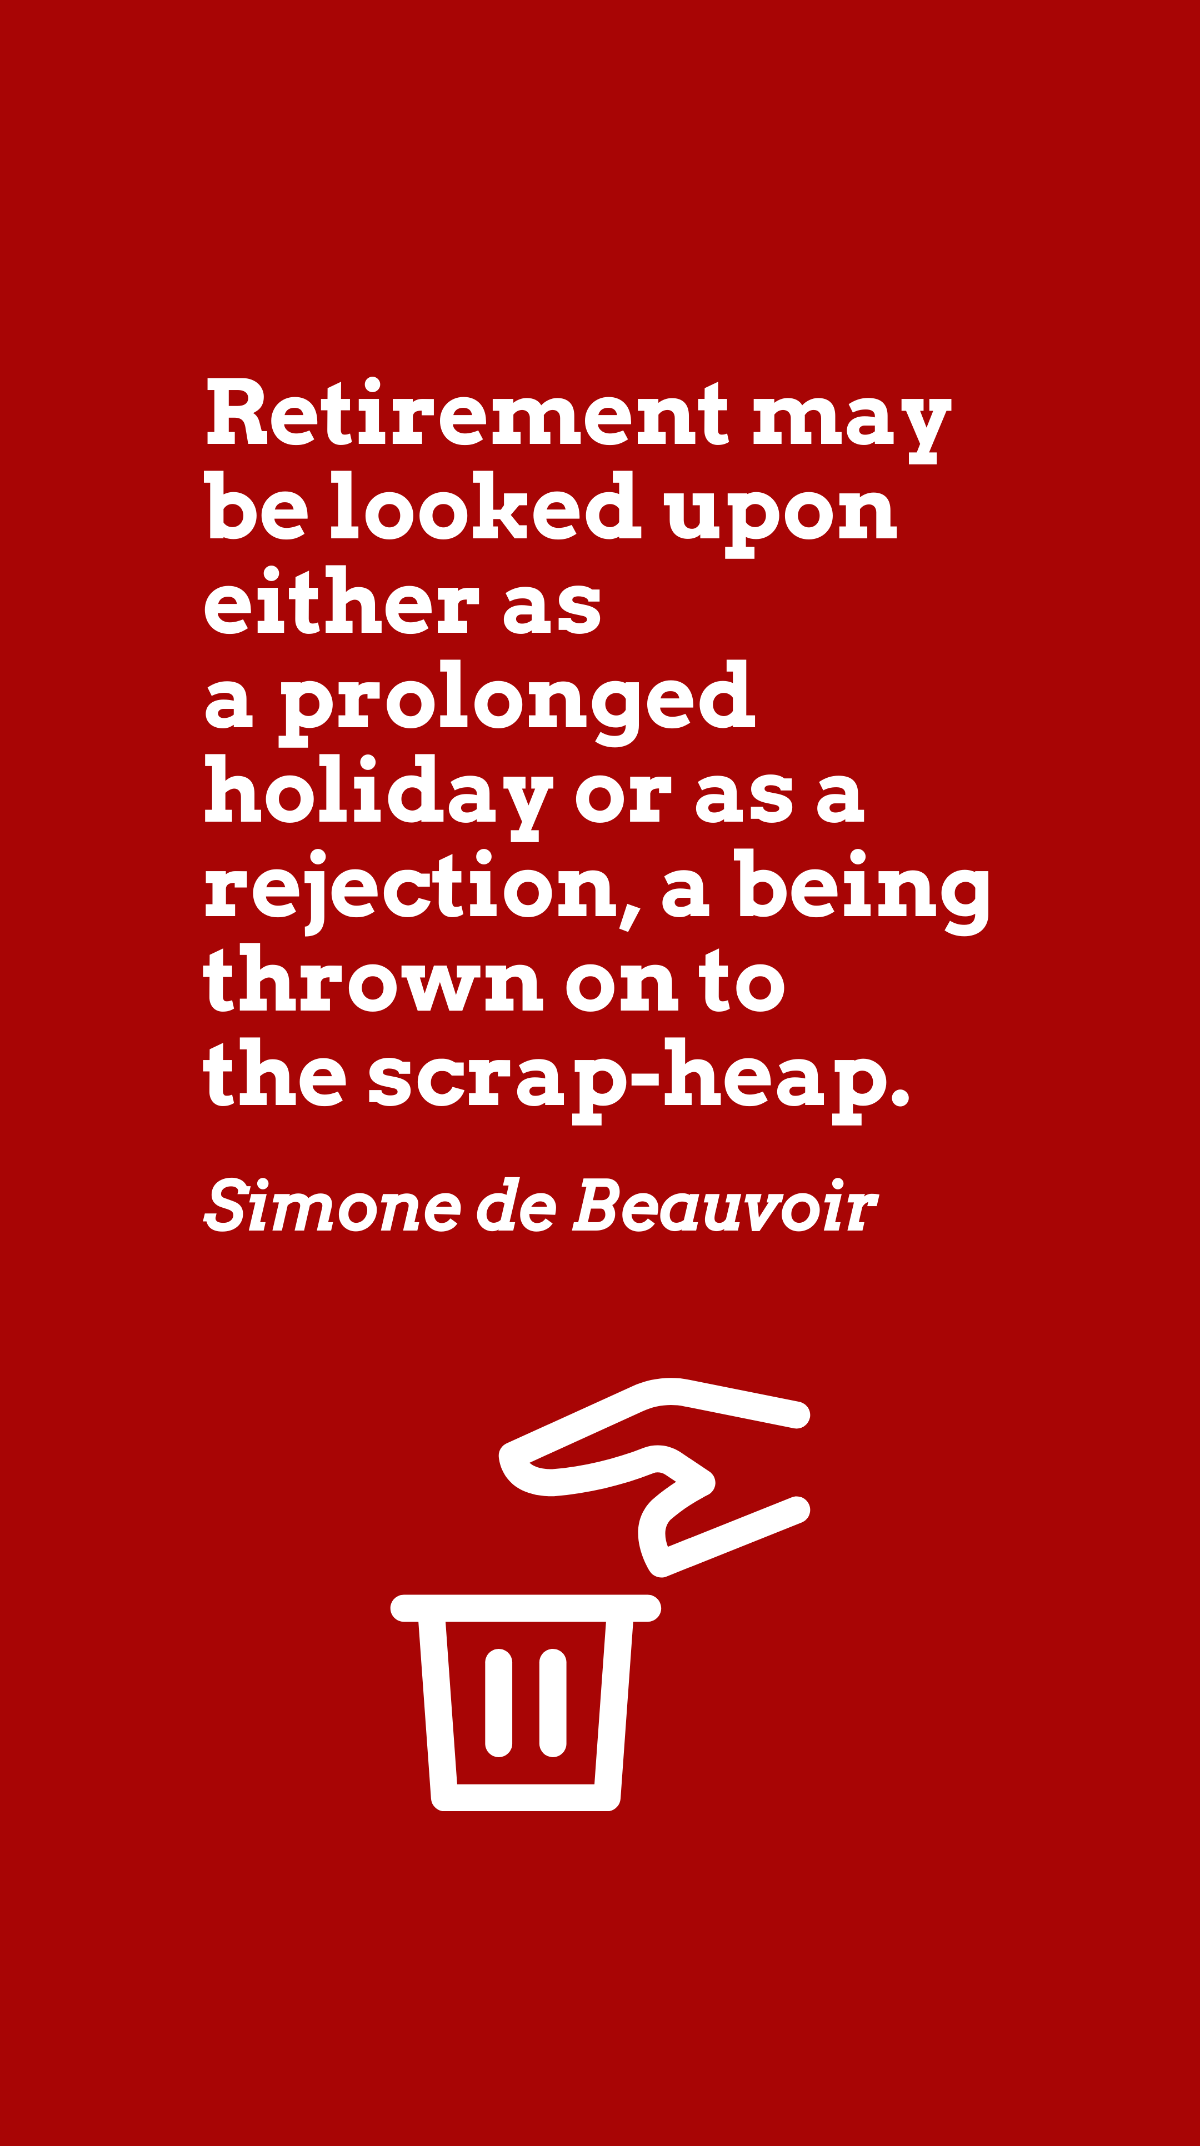 Simone de Beauvoir - Retirement may be looked upon either as a prolonged holiday or as a rejection, a being thrown on to the scrap-heap. Template